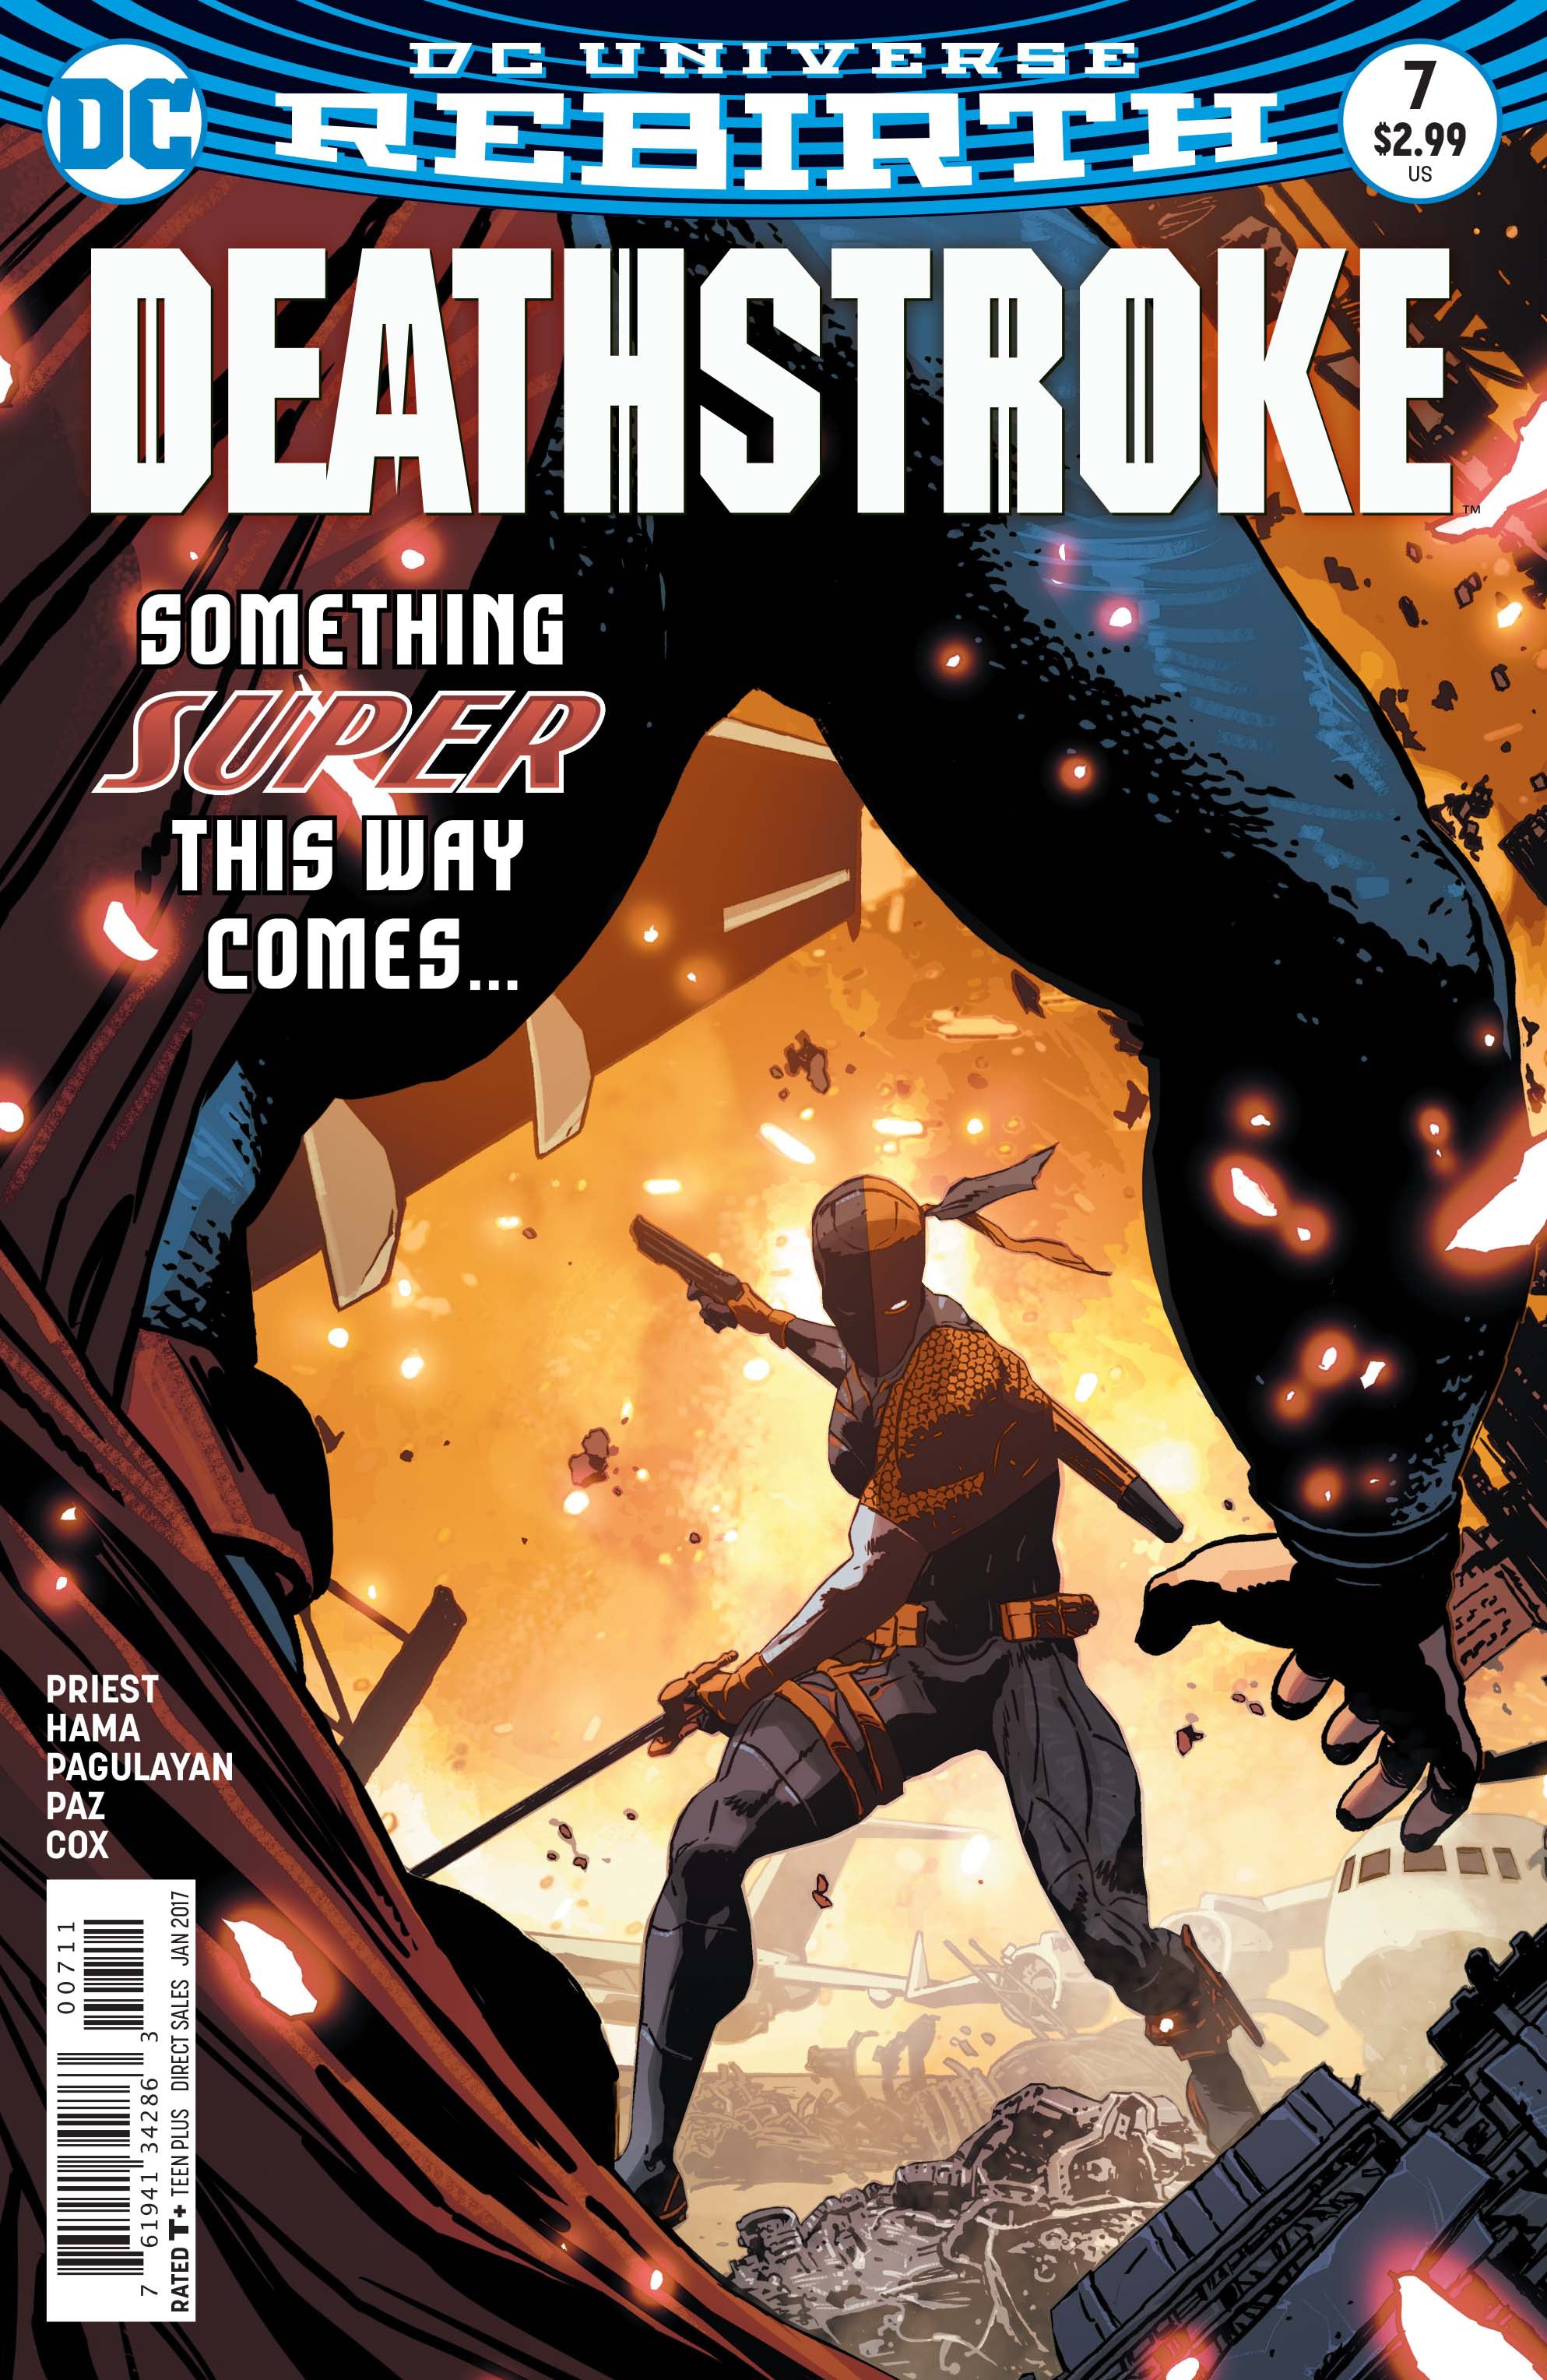 DEATHSTROKE #7 | Game Master's Emporium (The New GME)